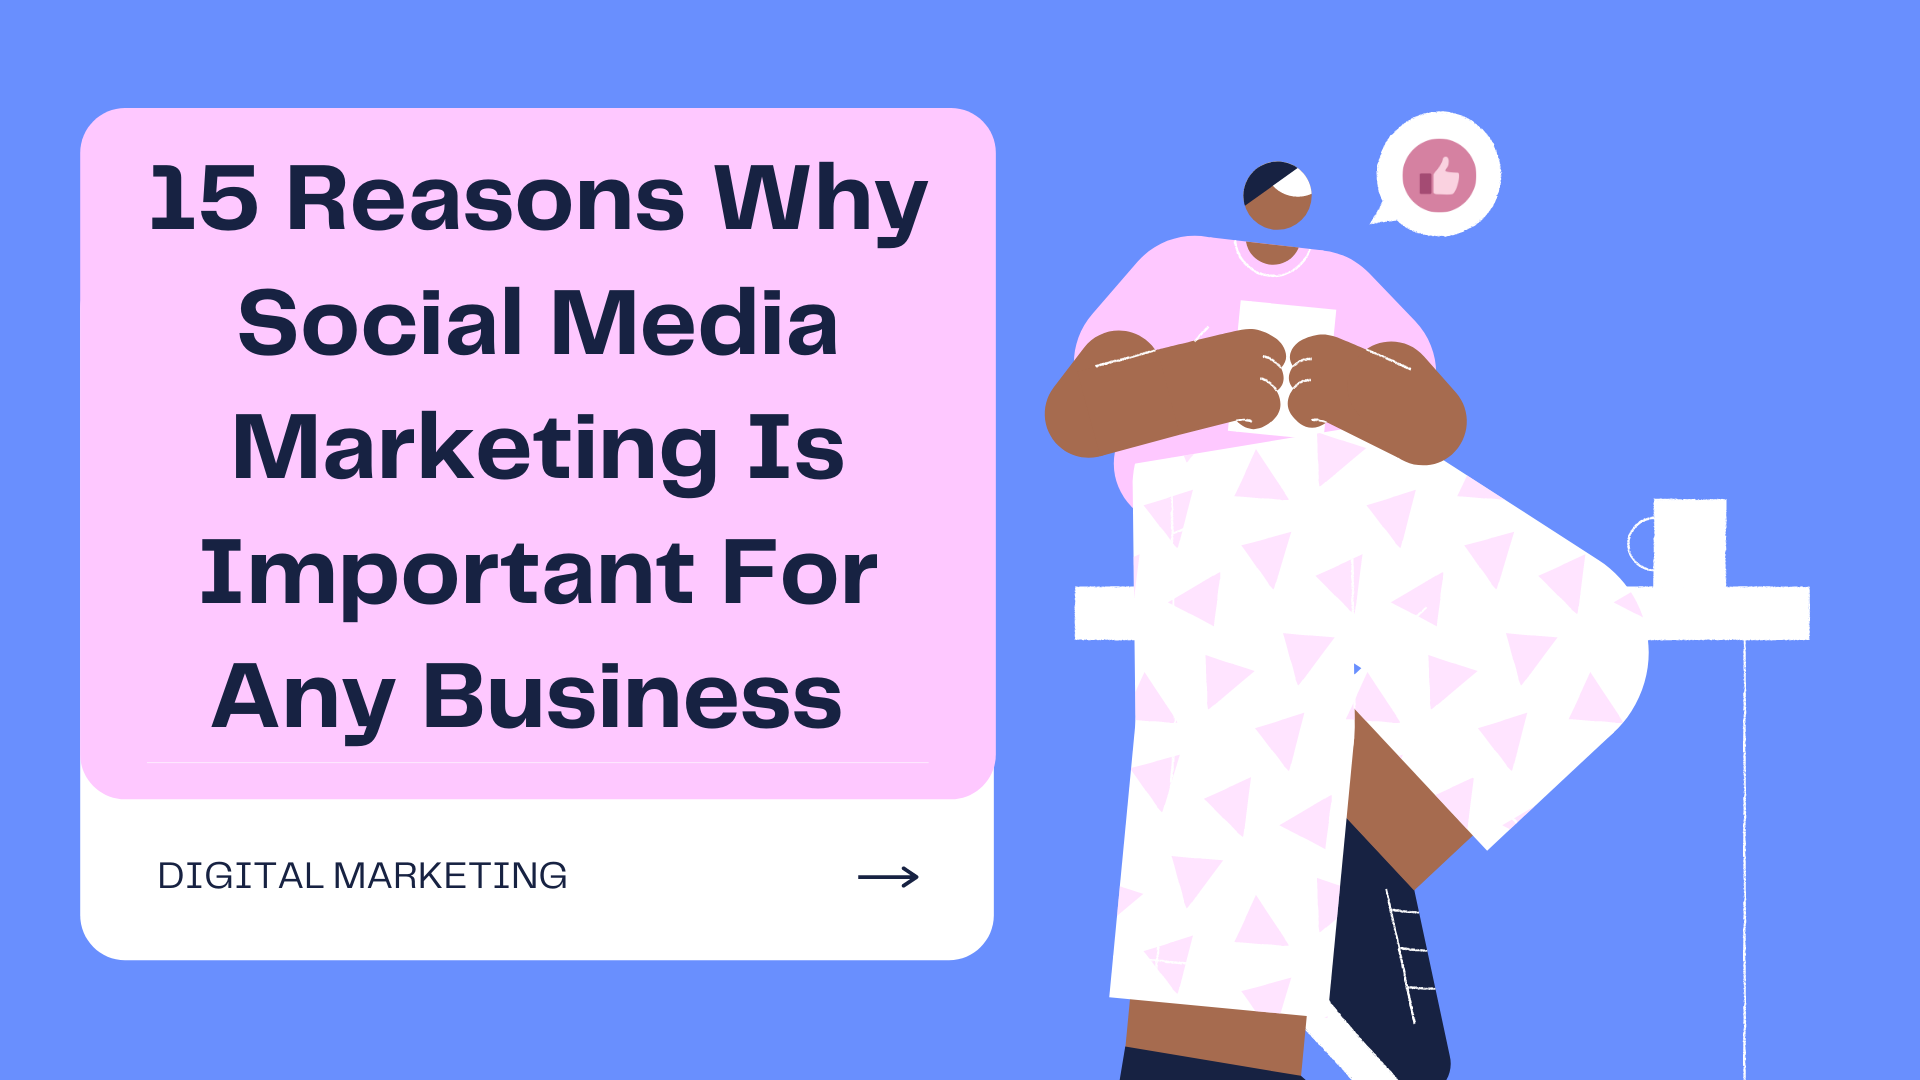 Why Social Media Marketing Is Important For Any Business